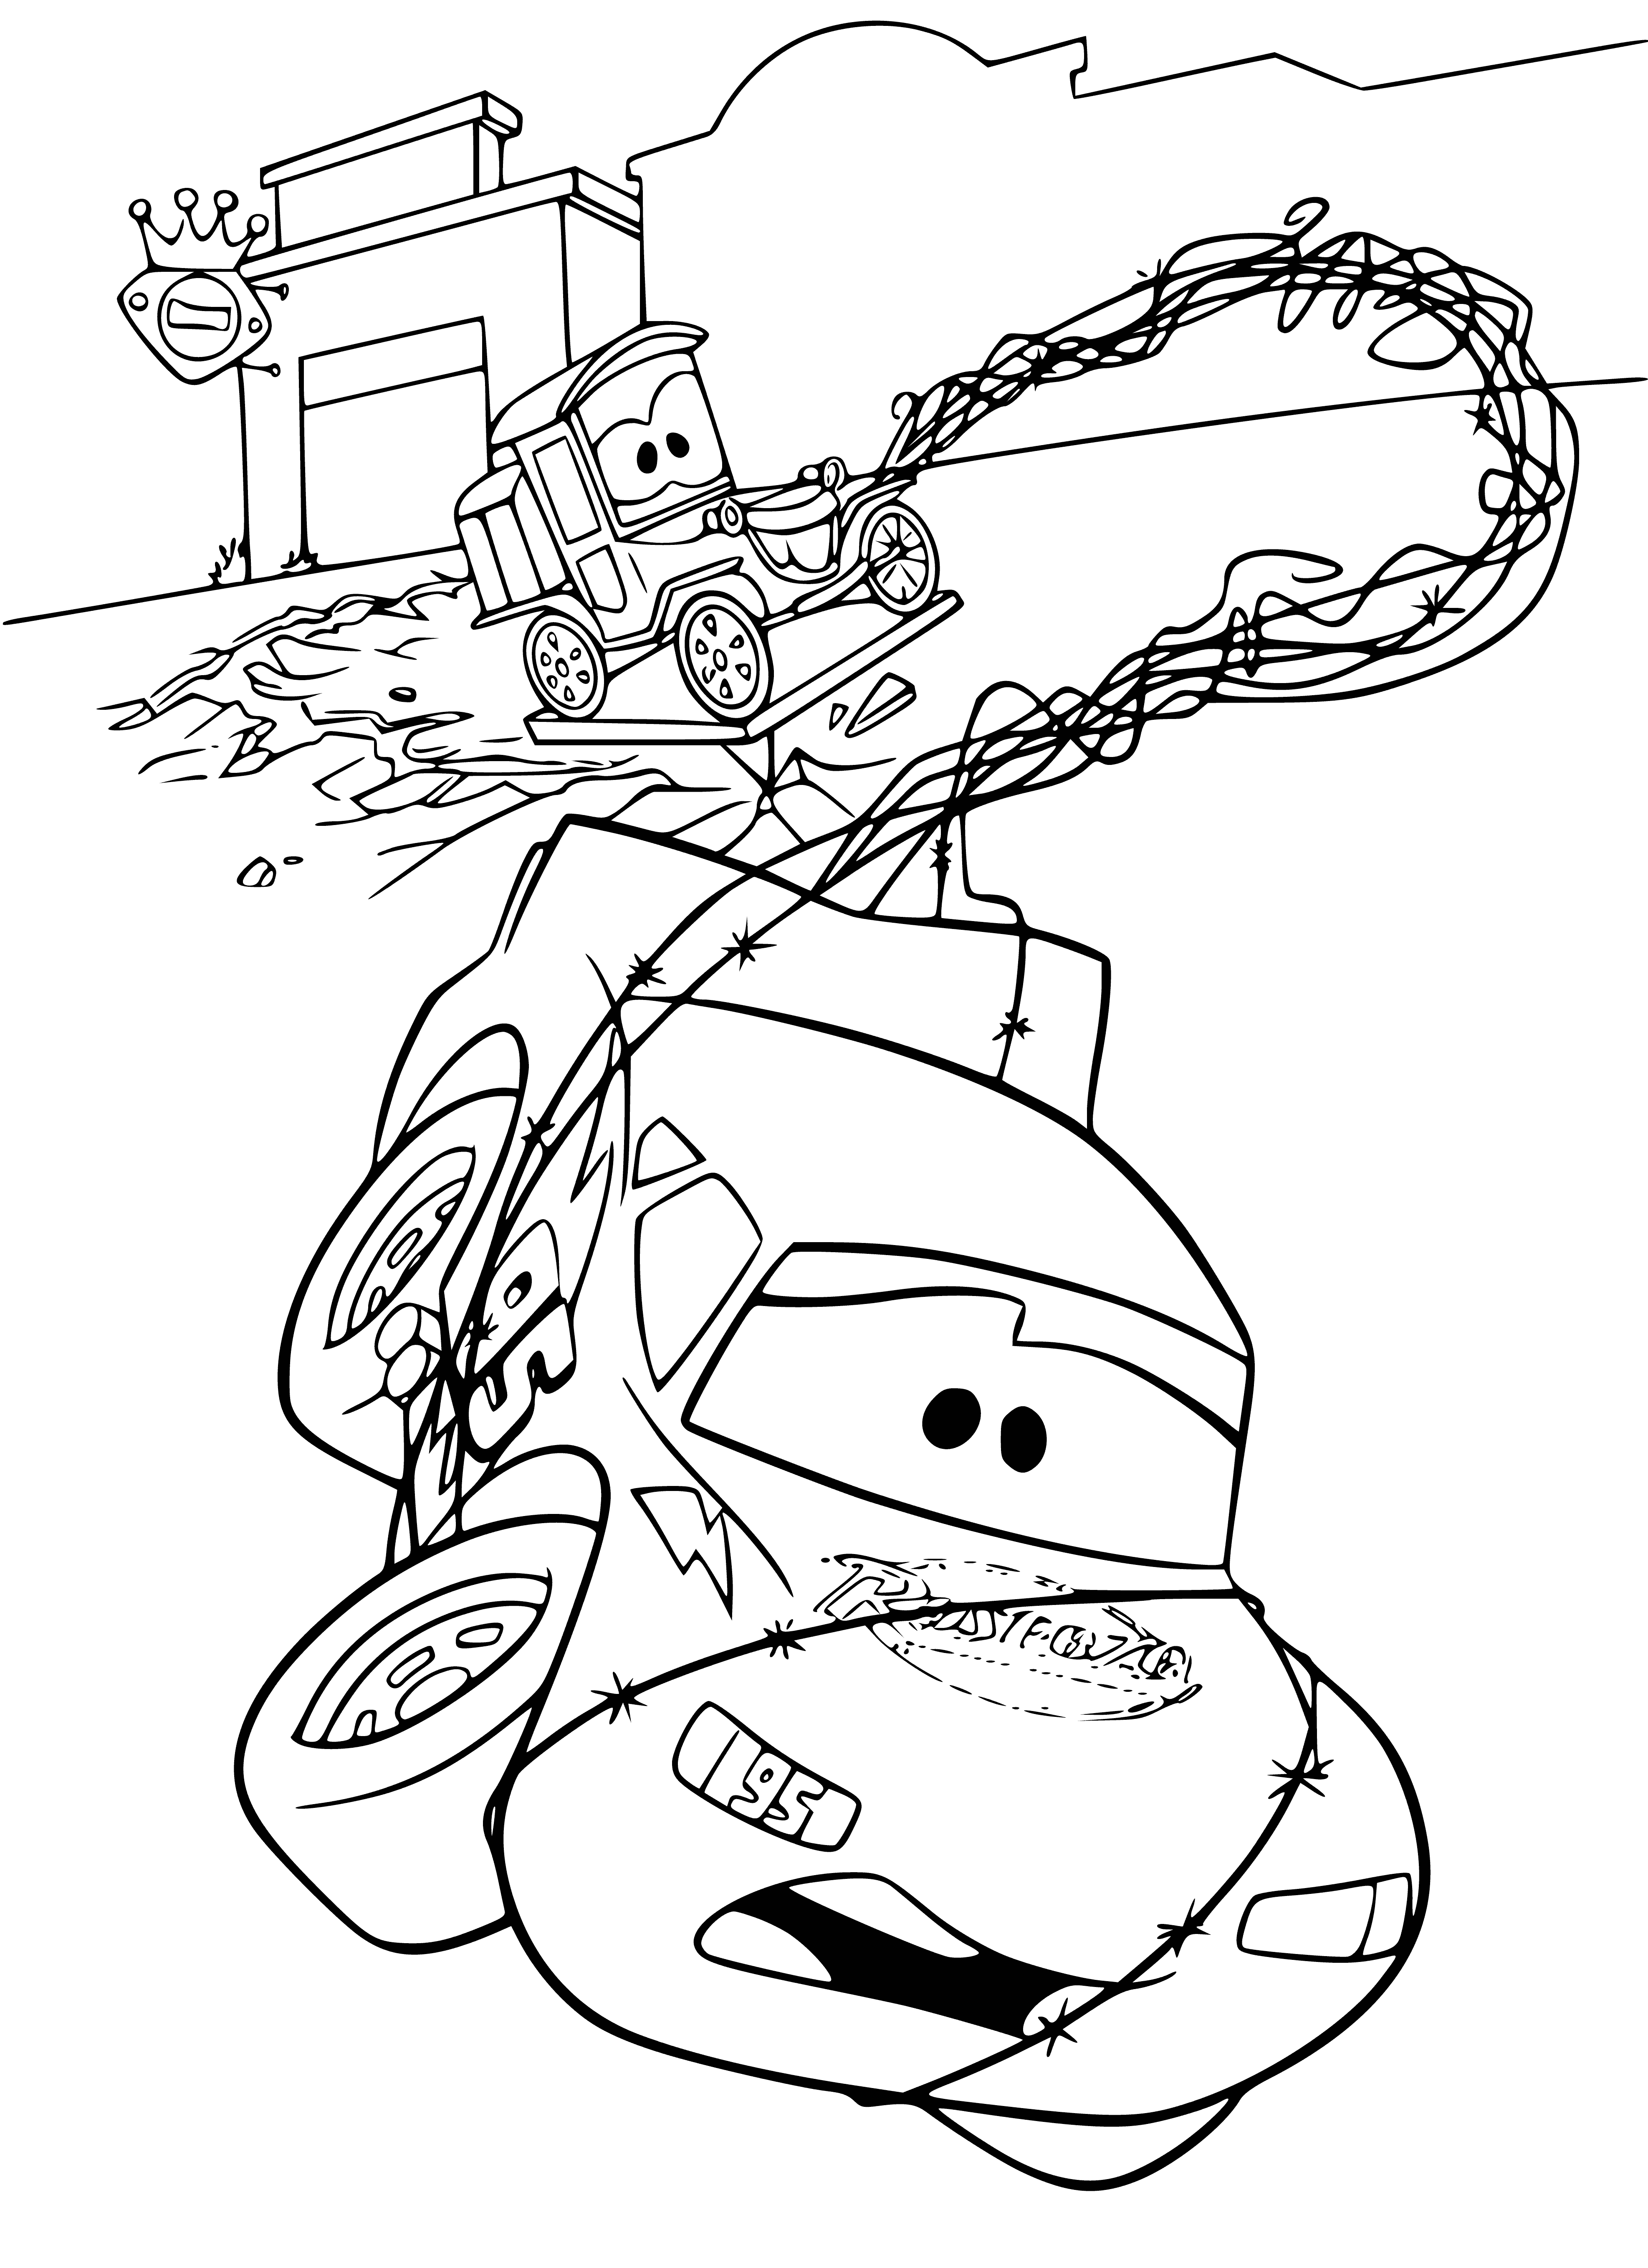 coloring page: Officer driving car quickly, man in backseat with hands behind back, worried expression.